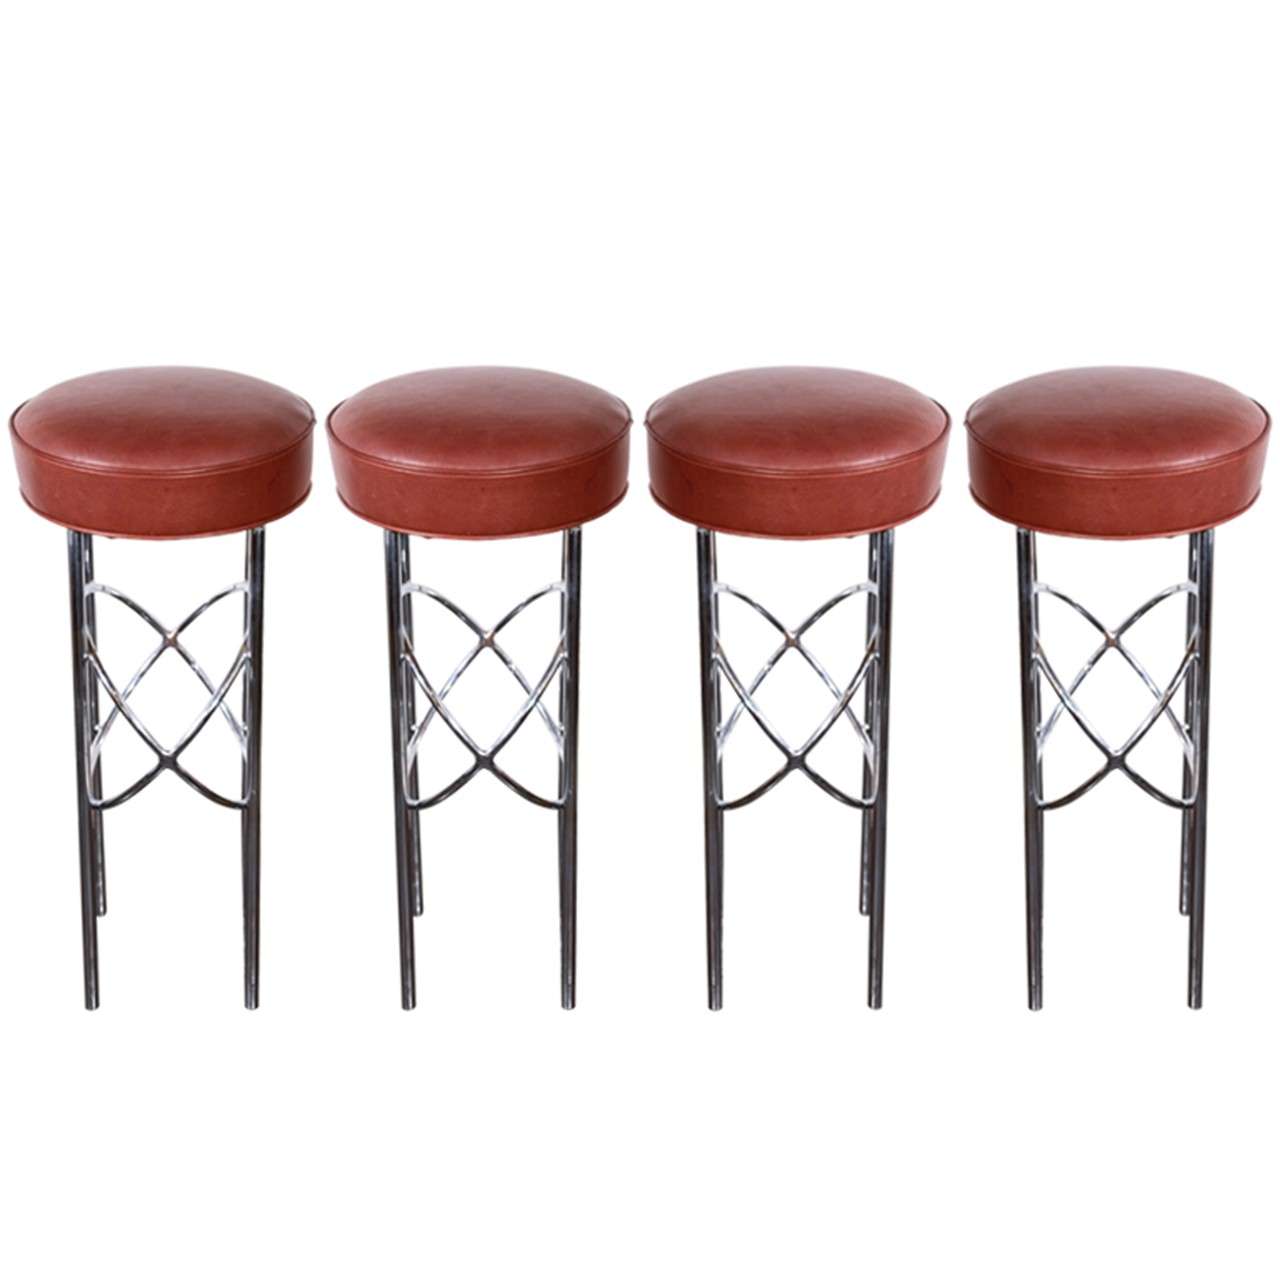 Set of 4 Stools by James Mont, ca 1940's For Sale